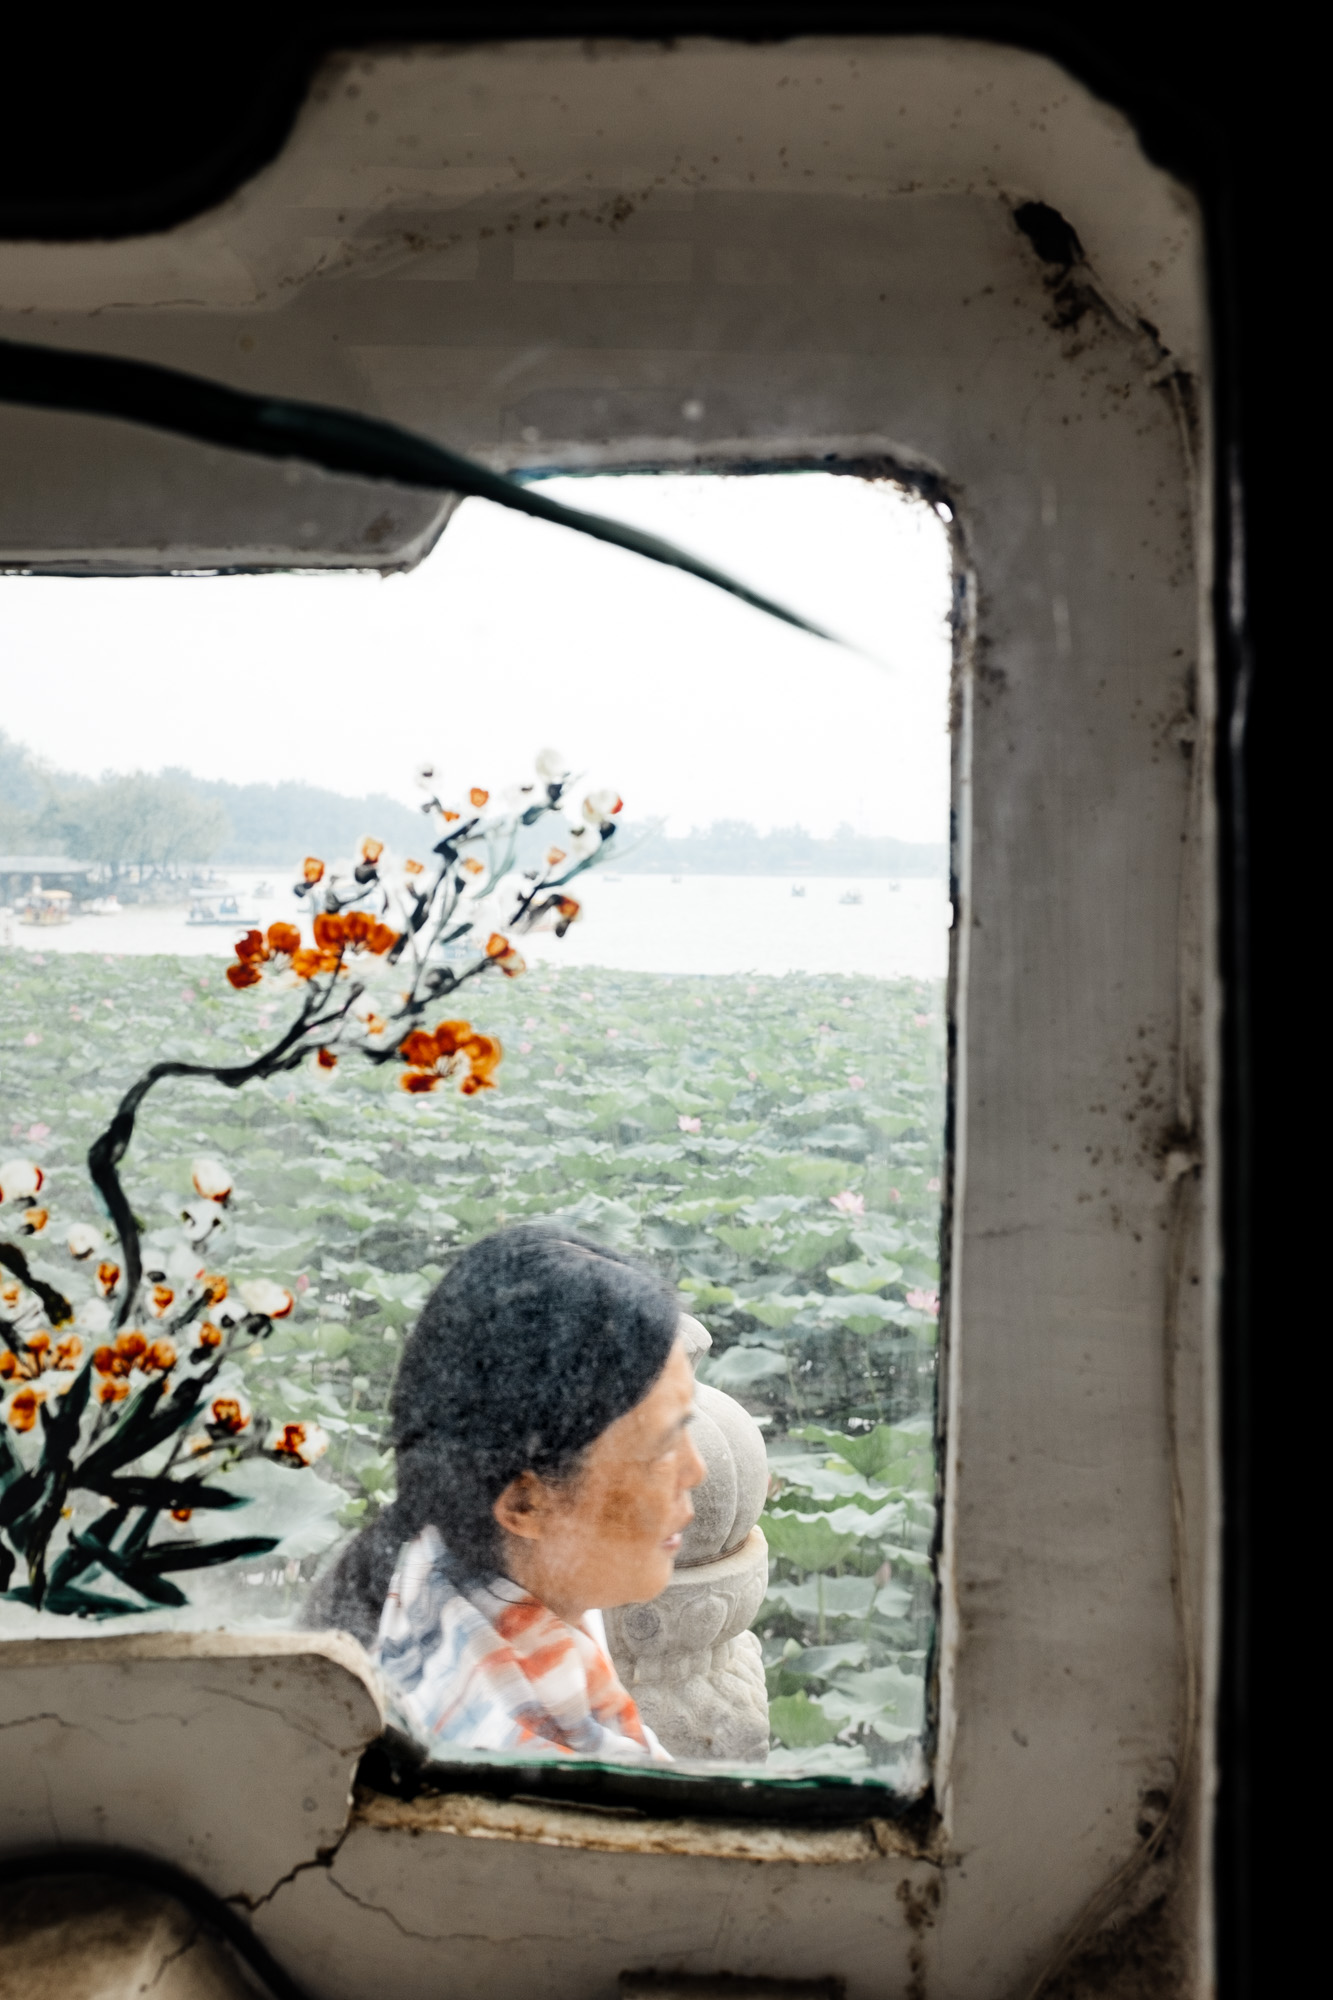  A woman through a window at the Summer Palace, Beijing, August 2017 